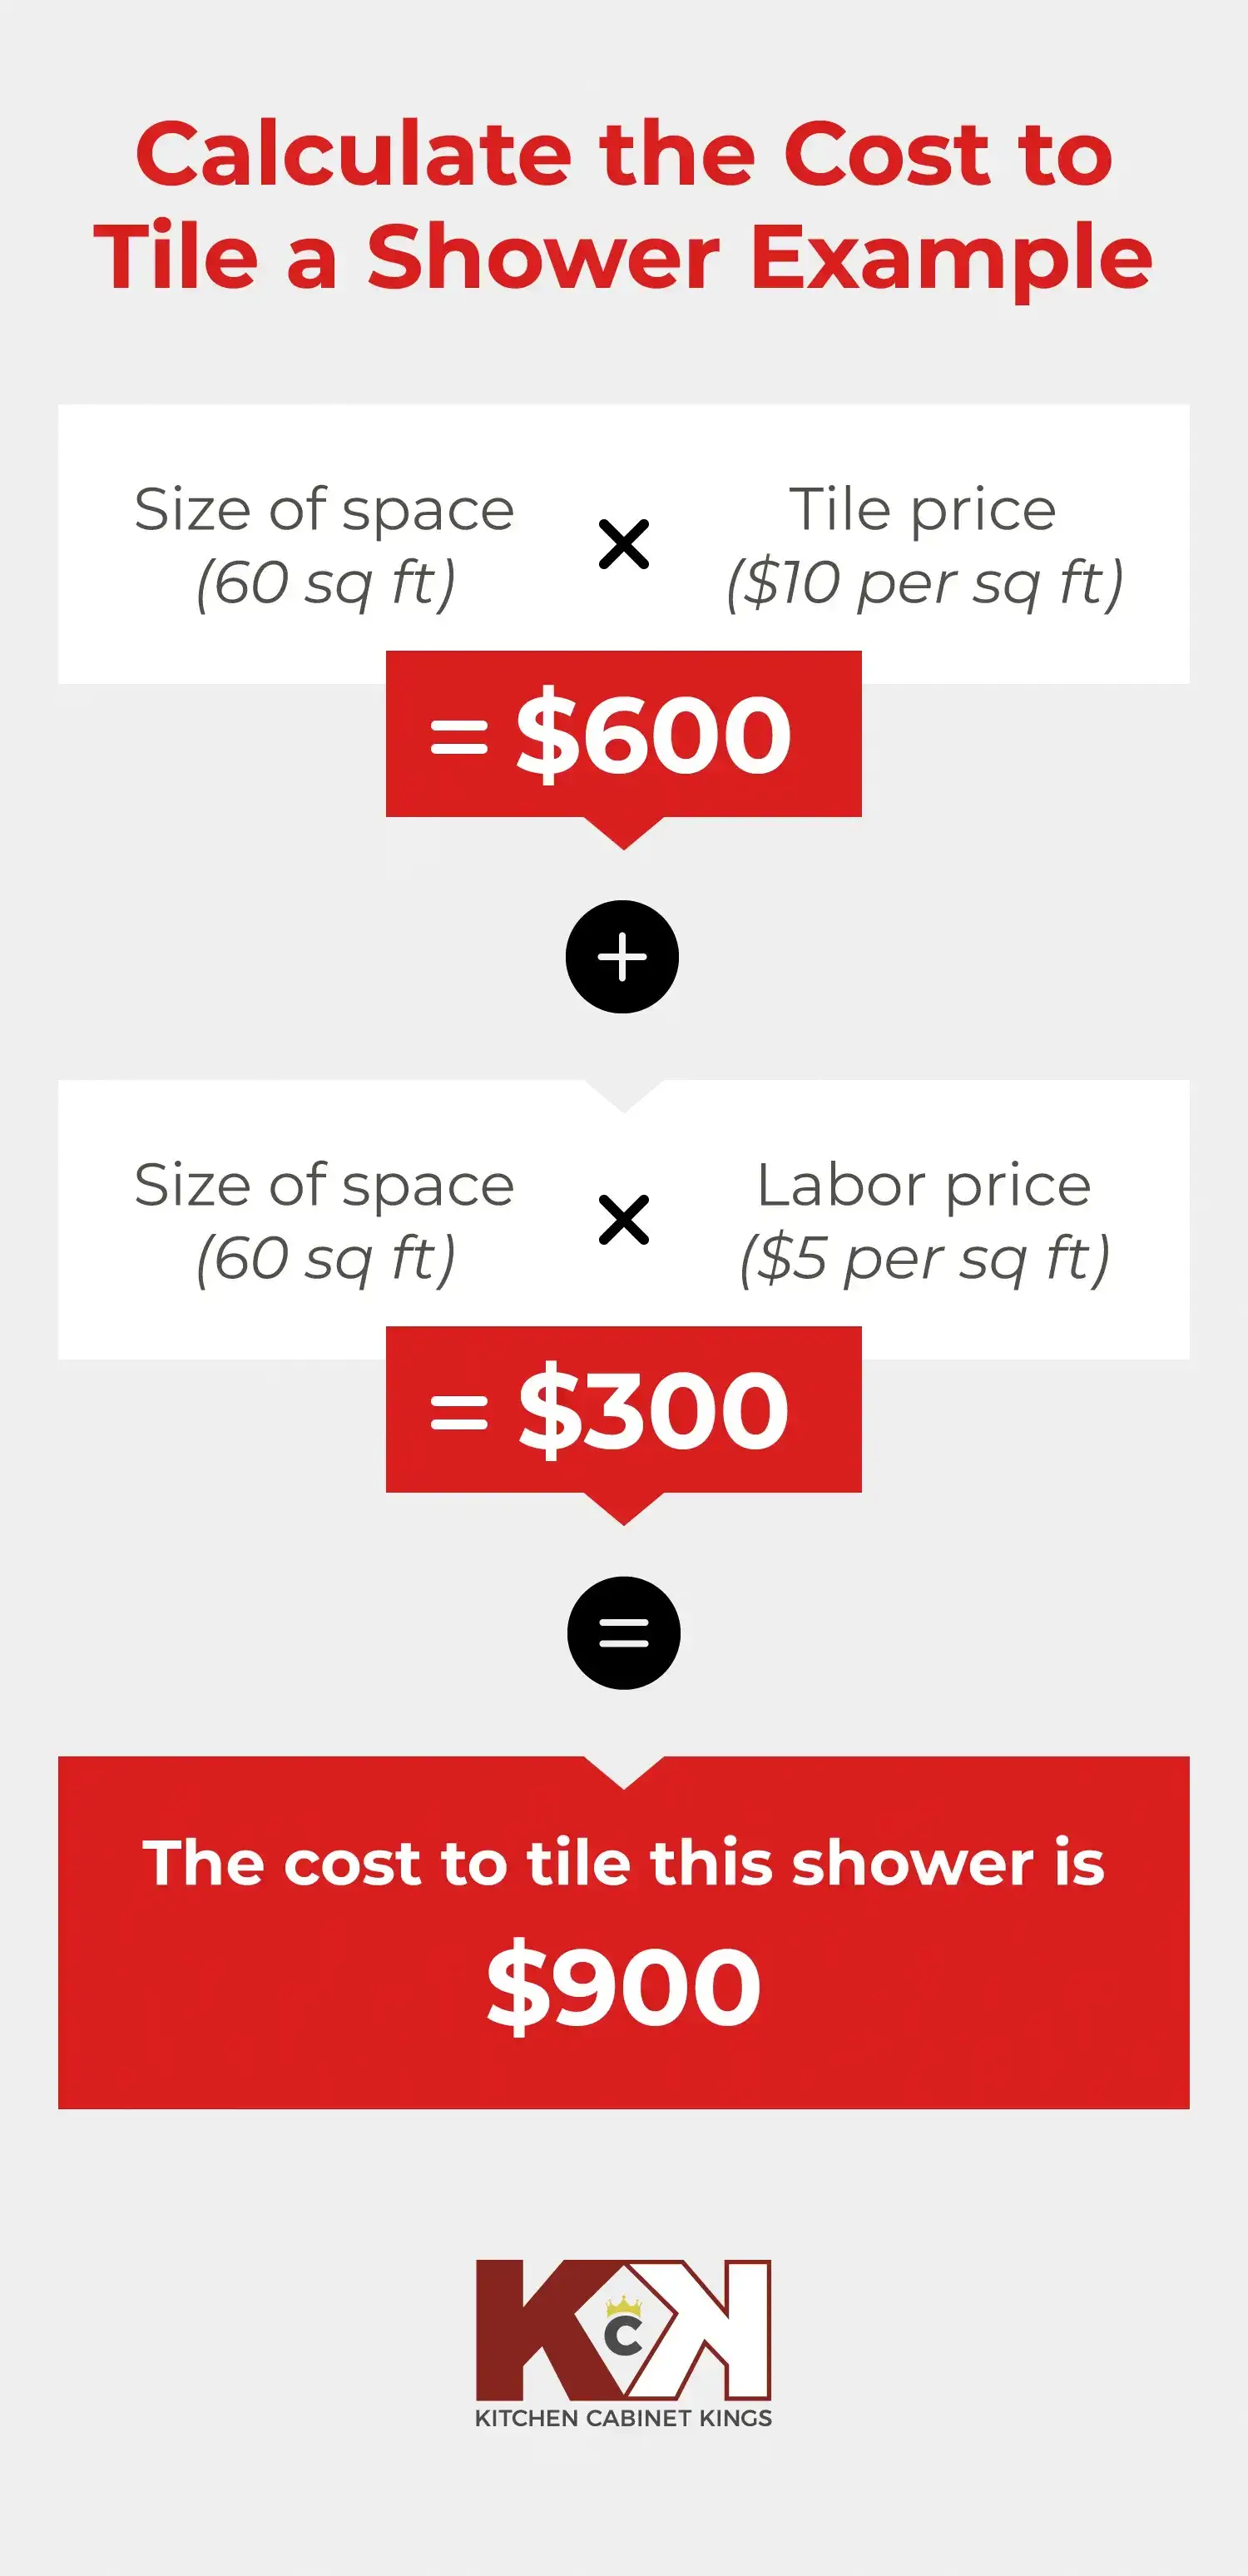 Calculate the cost to tile a shower example.